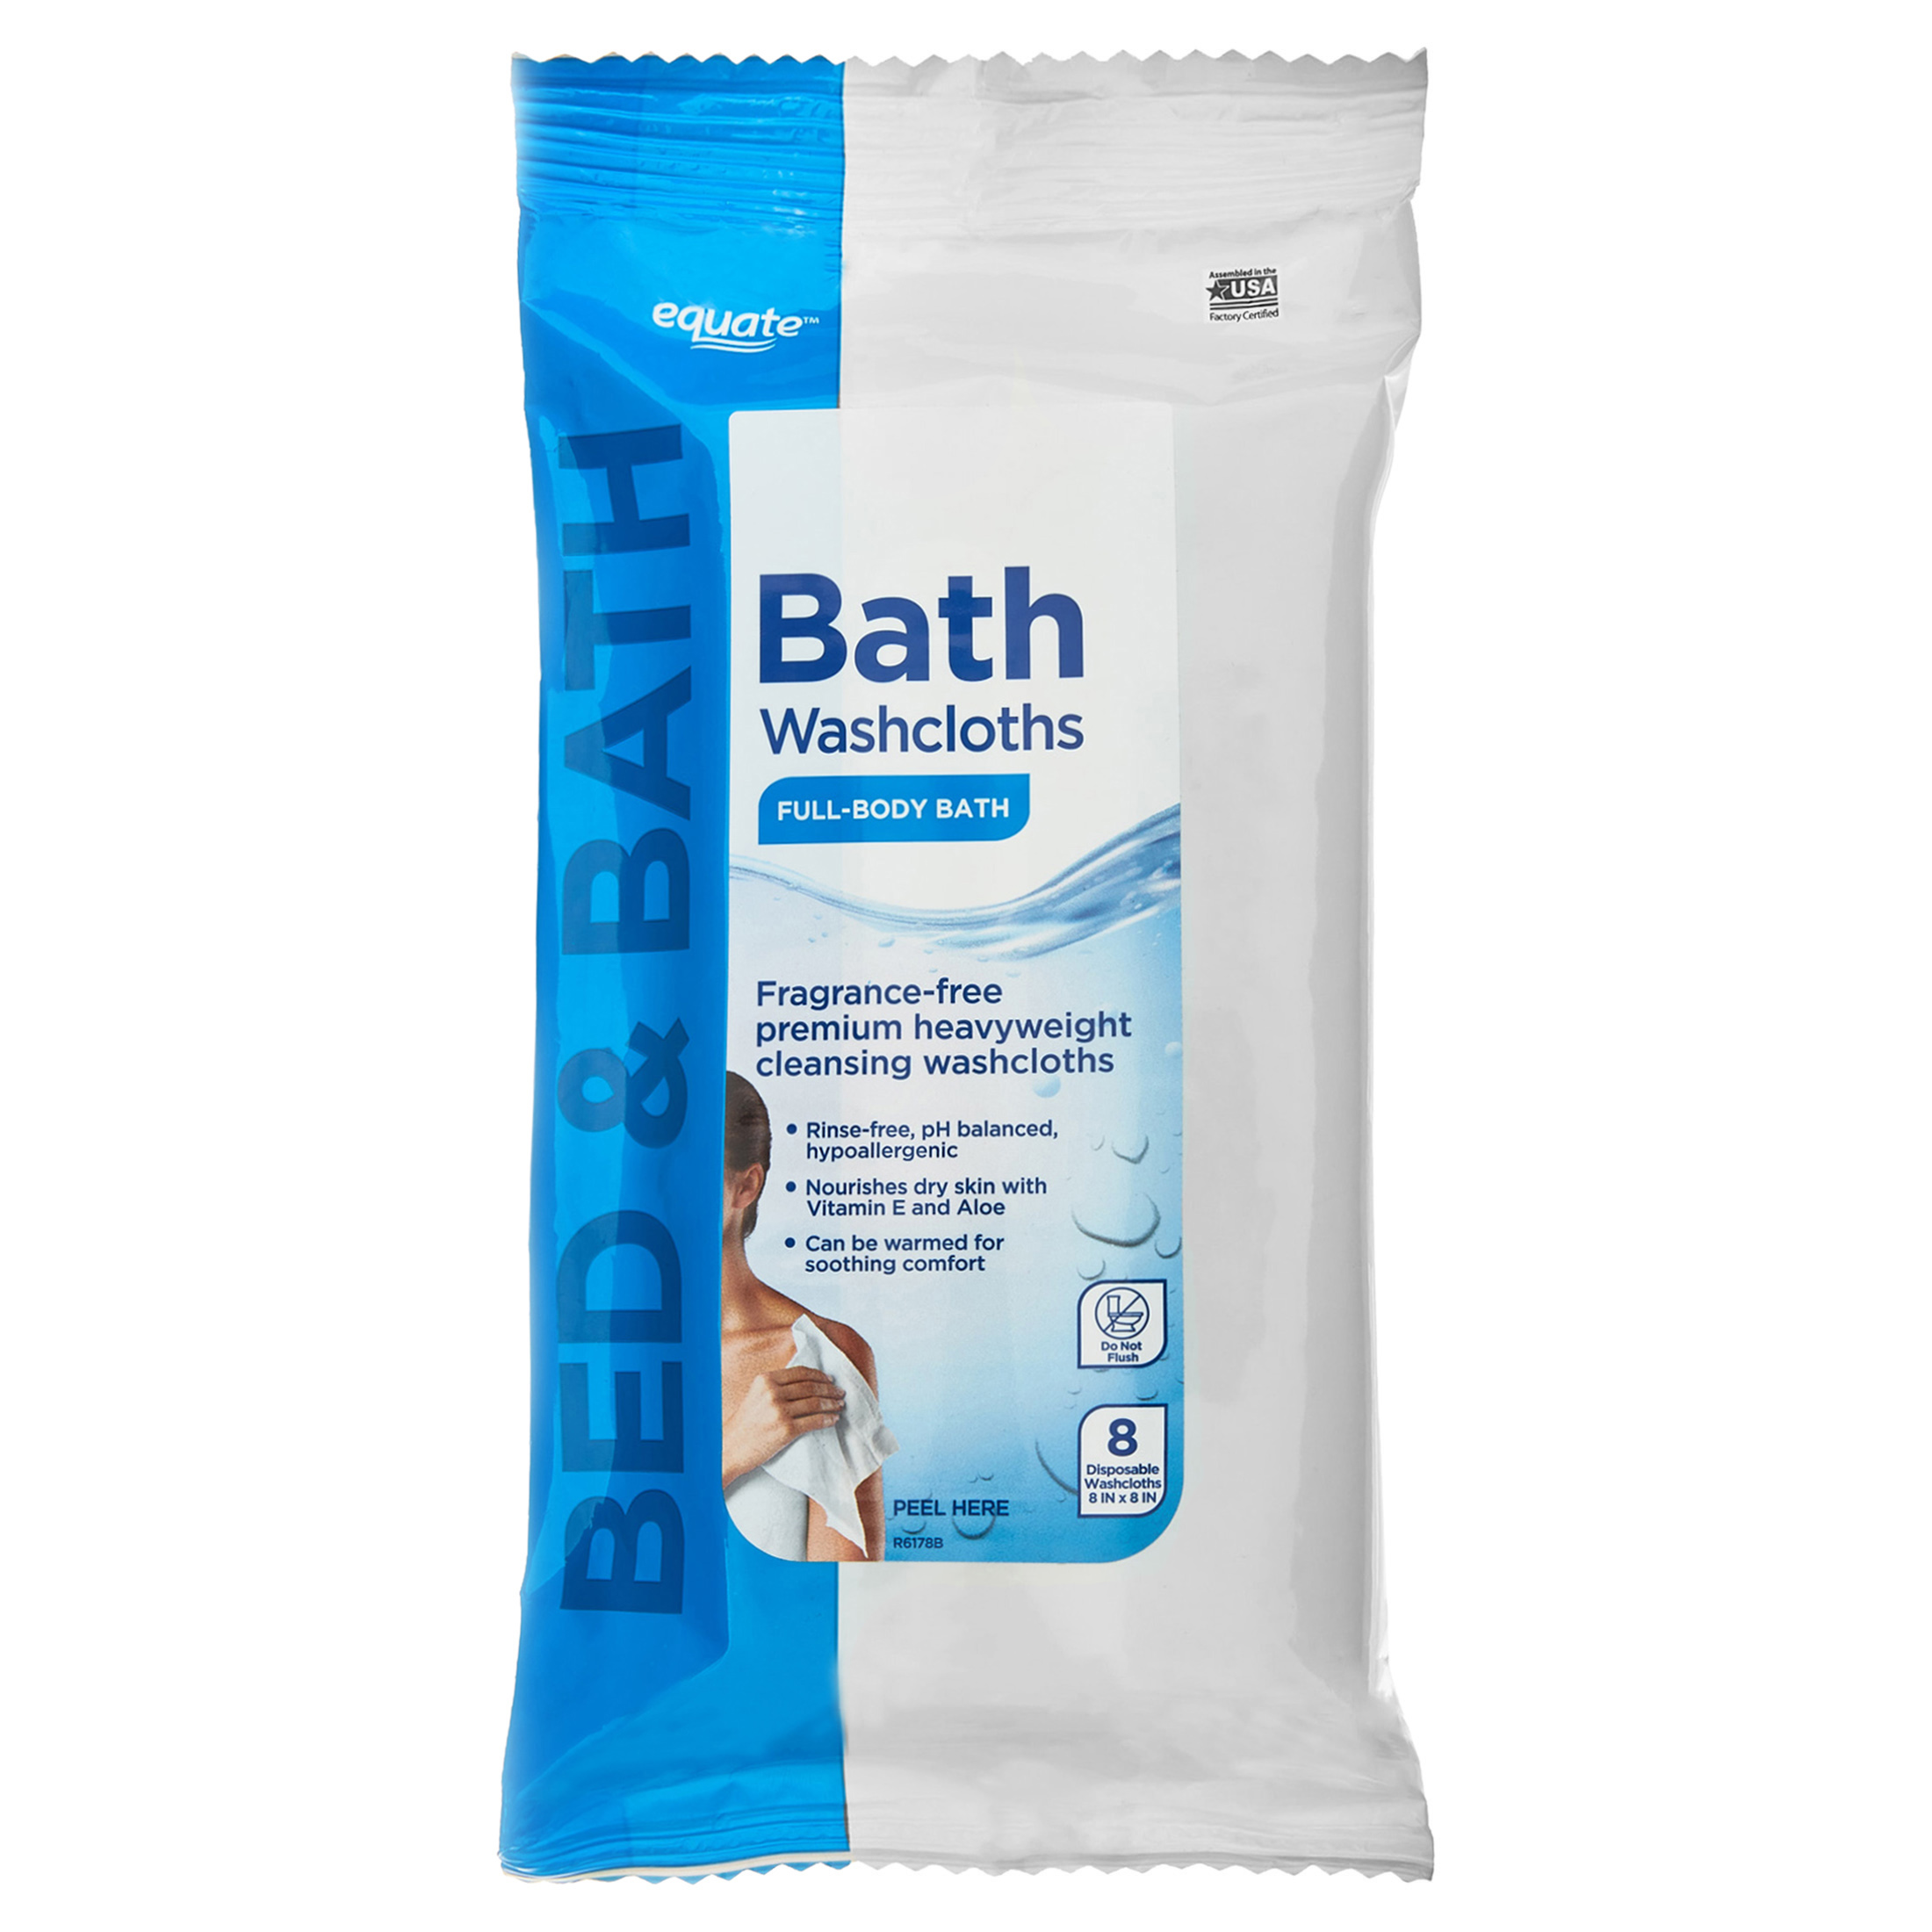 Equate Premium Heavyweight Bath Cleansing Washcloths, White bath washcloths are fragrance-free, 8 count - image 1 of 8